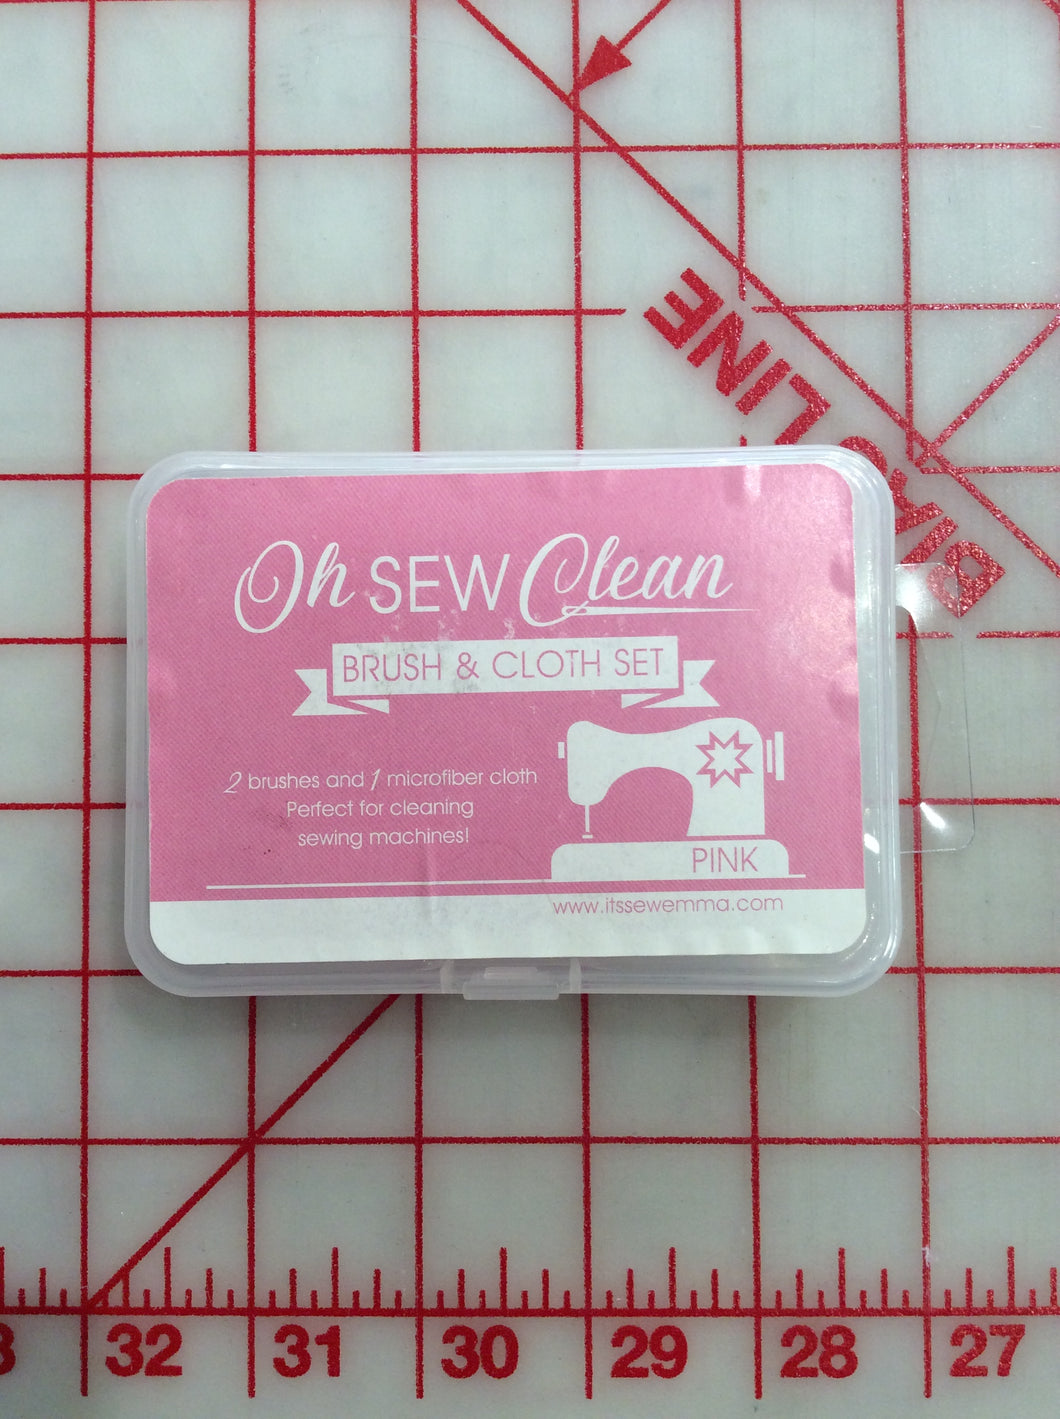 Oh Sew Clean Brush And Cloth Set Pink